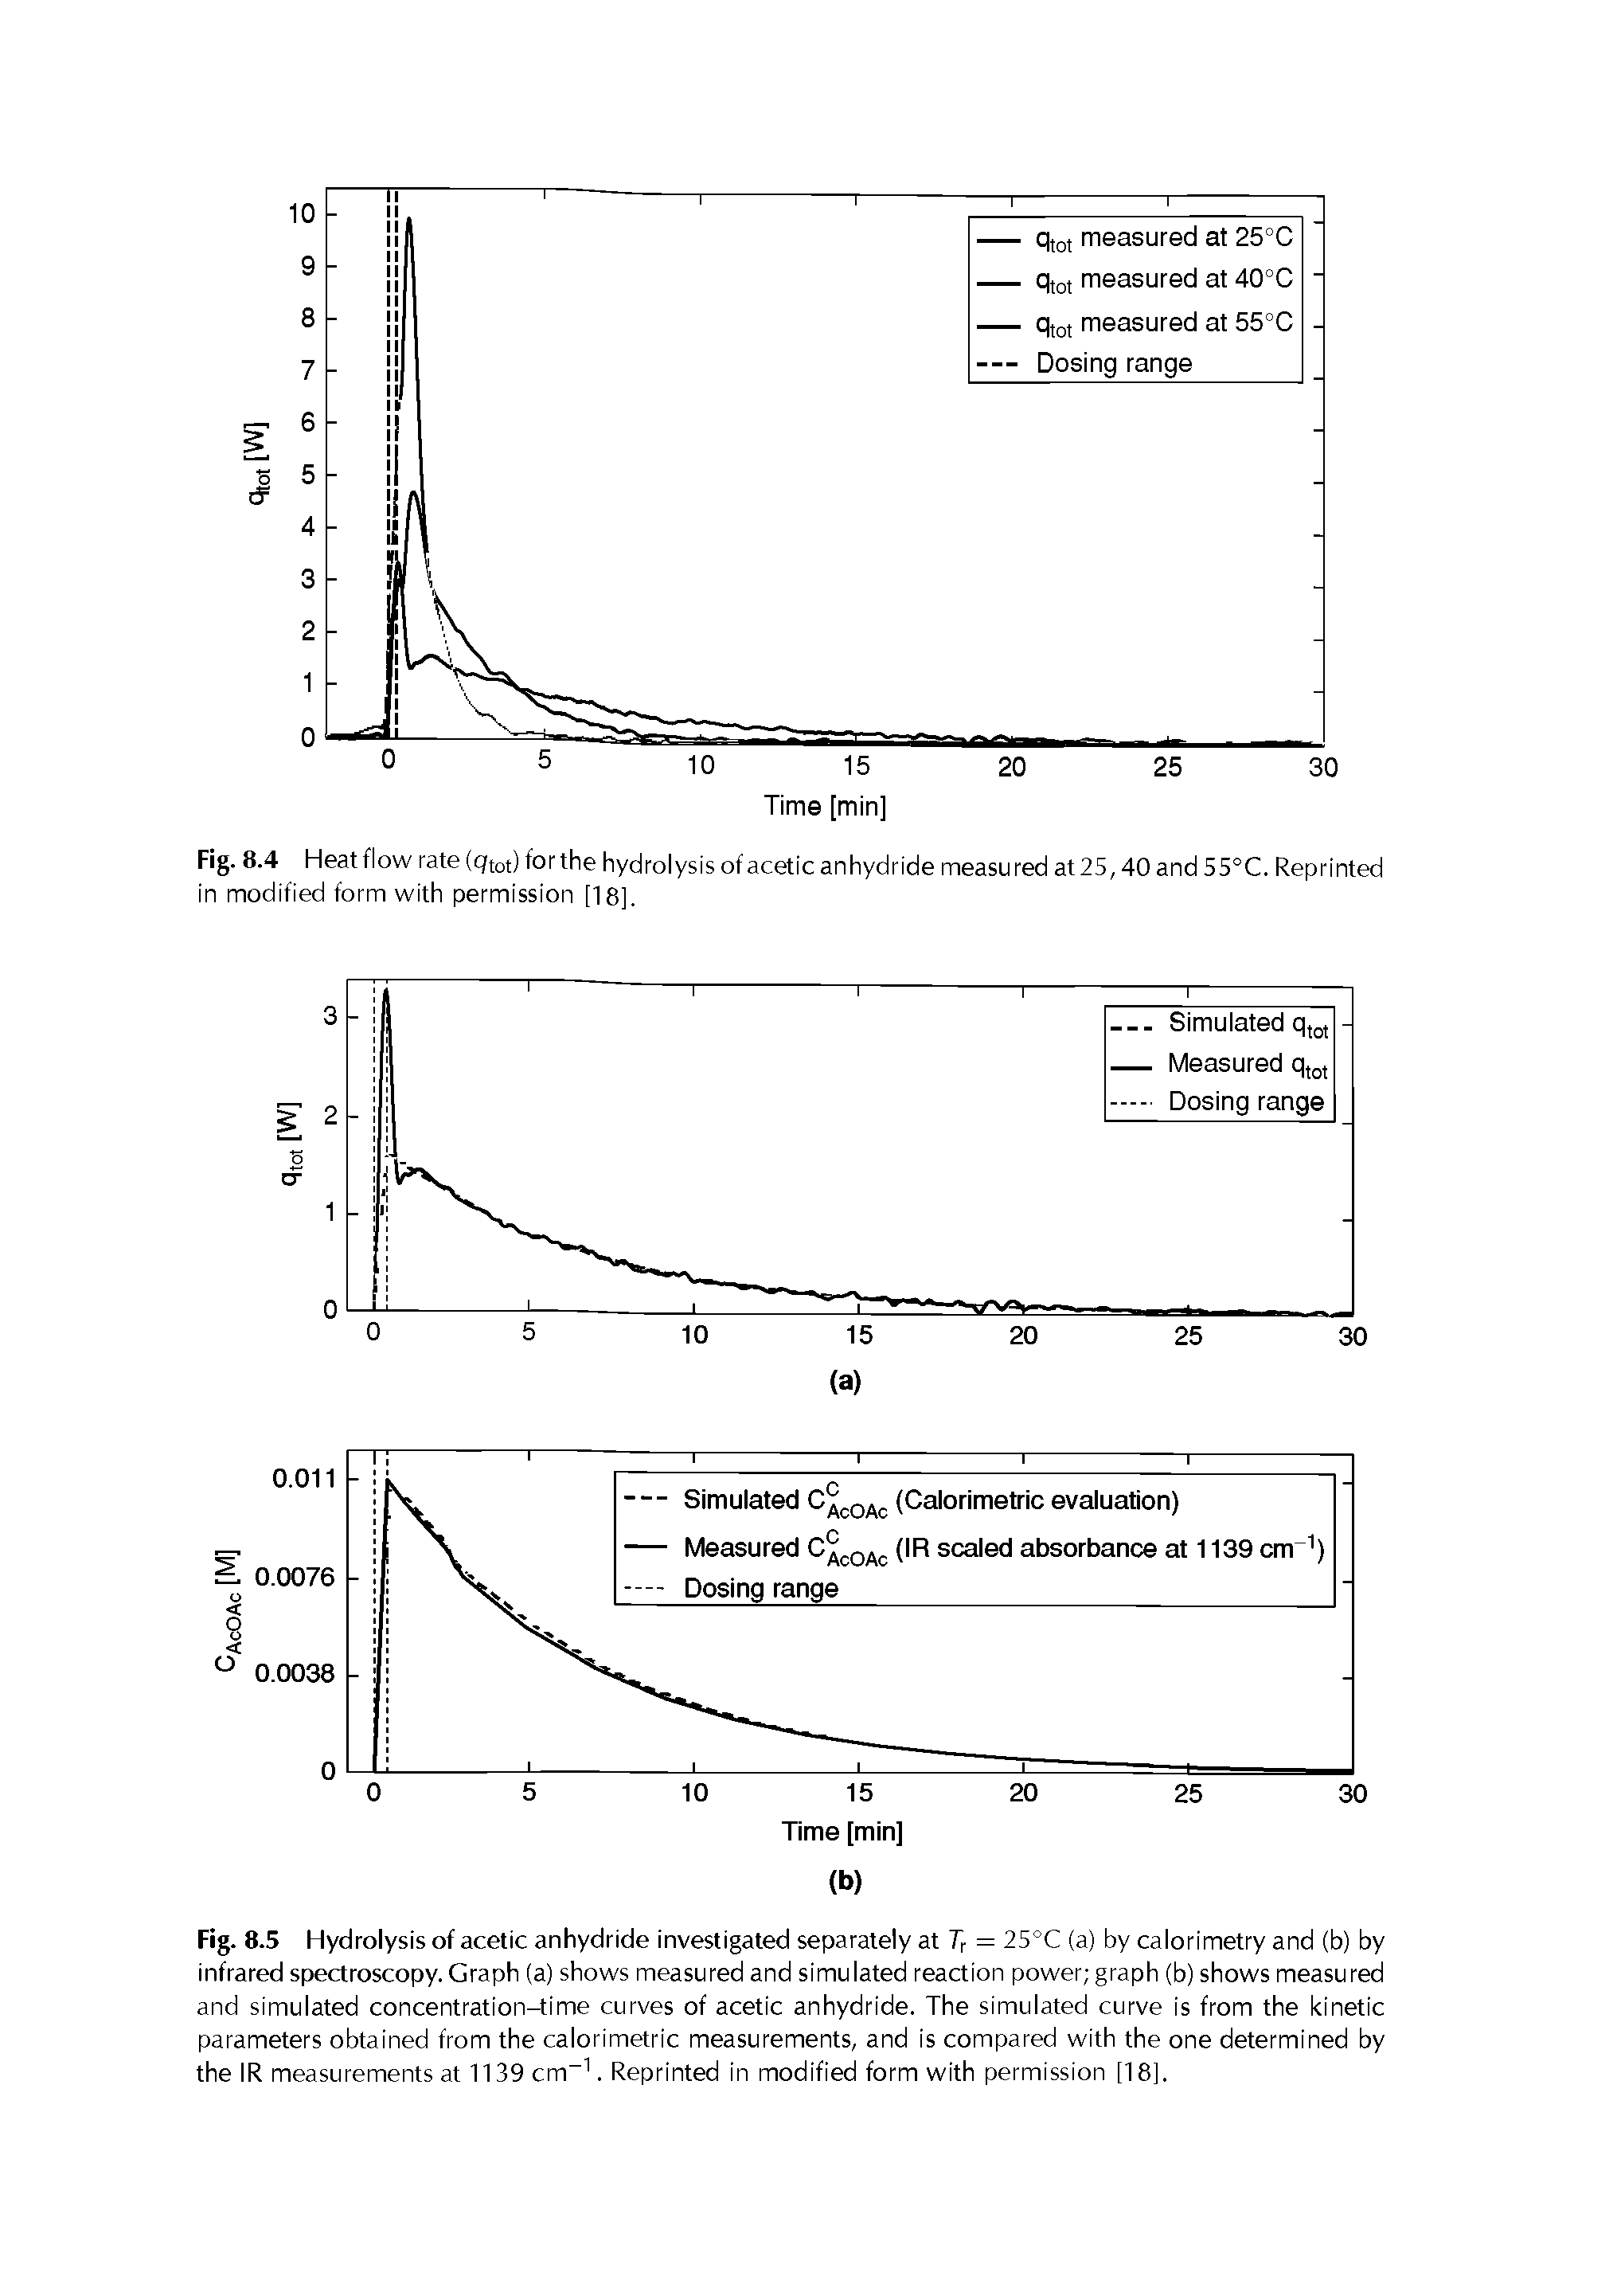 Fig. 8.5 Hydrolysis of acetic anhydride investigated separately at Tr = 25°C (a) by calorimetry and (b) by infrared spectroscopy. Graph (a) shows measured and simulated reaction power graph (b) shows measured and simulated concentration-time curves of acetic anhydride. The simulated curve is from the kinetic parameters obtained from the calorimetric measurements, and is compared with the one determined by the IR measurements at 1139 cm-1. Reprinted in modified form with permission [18],...